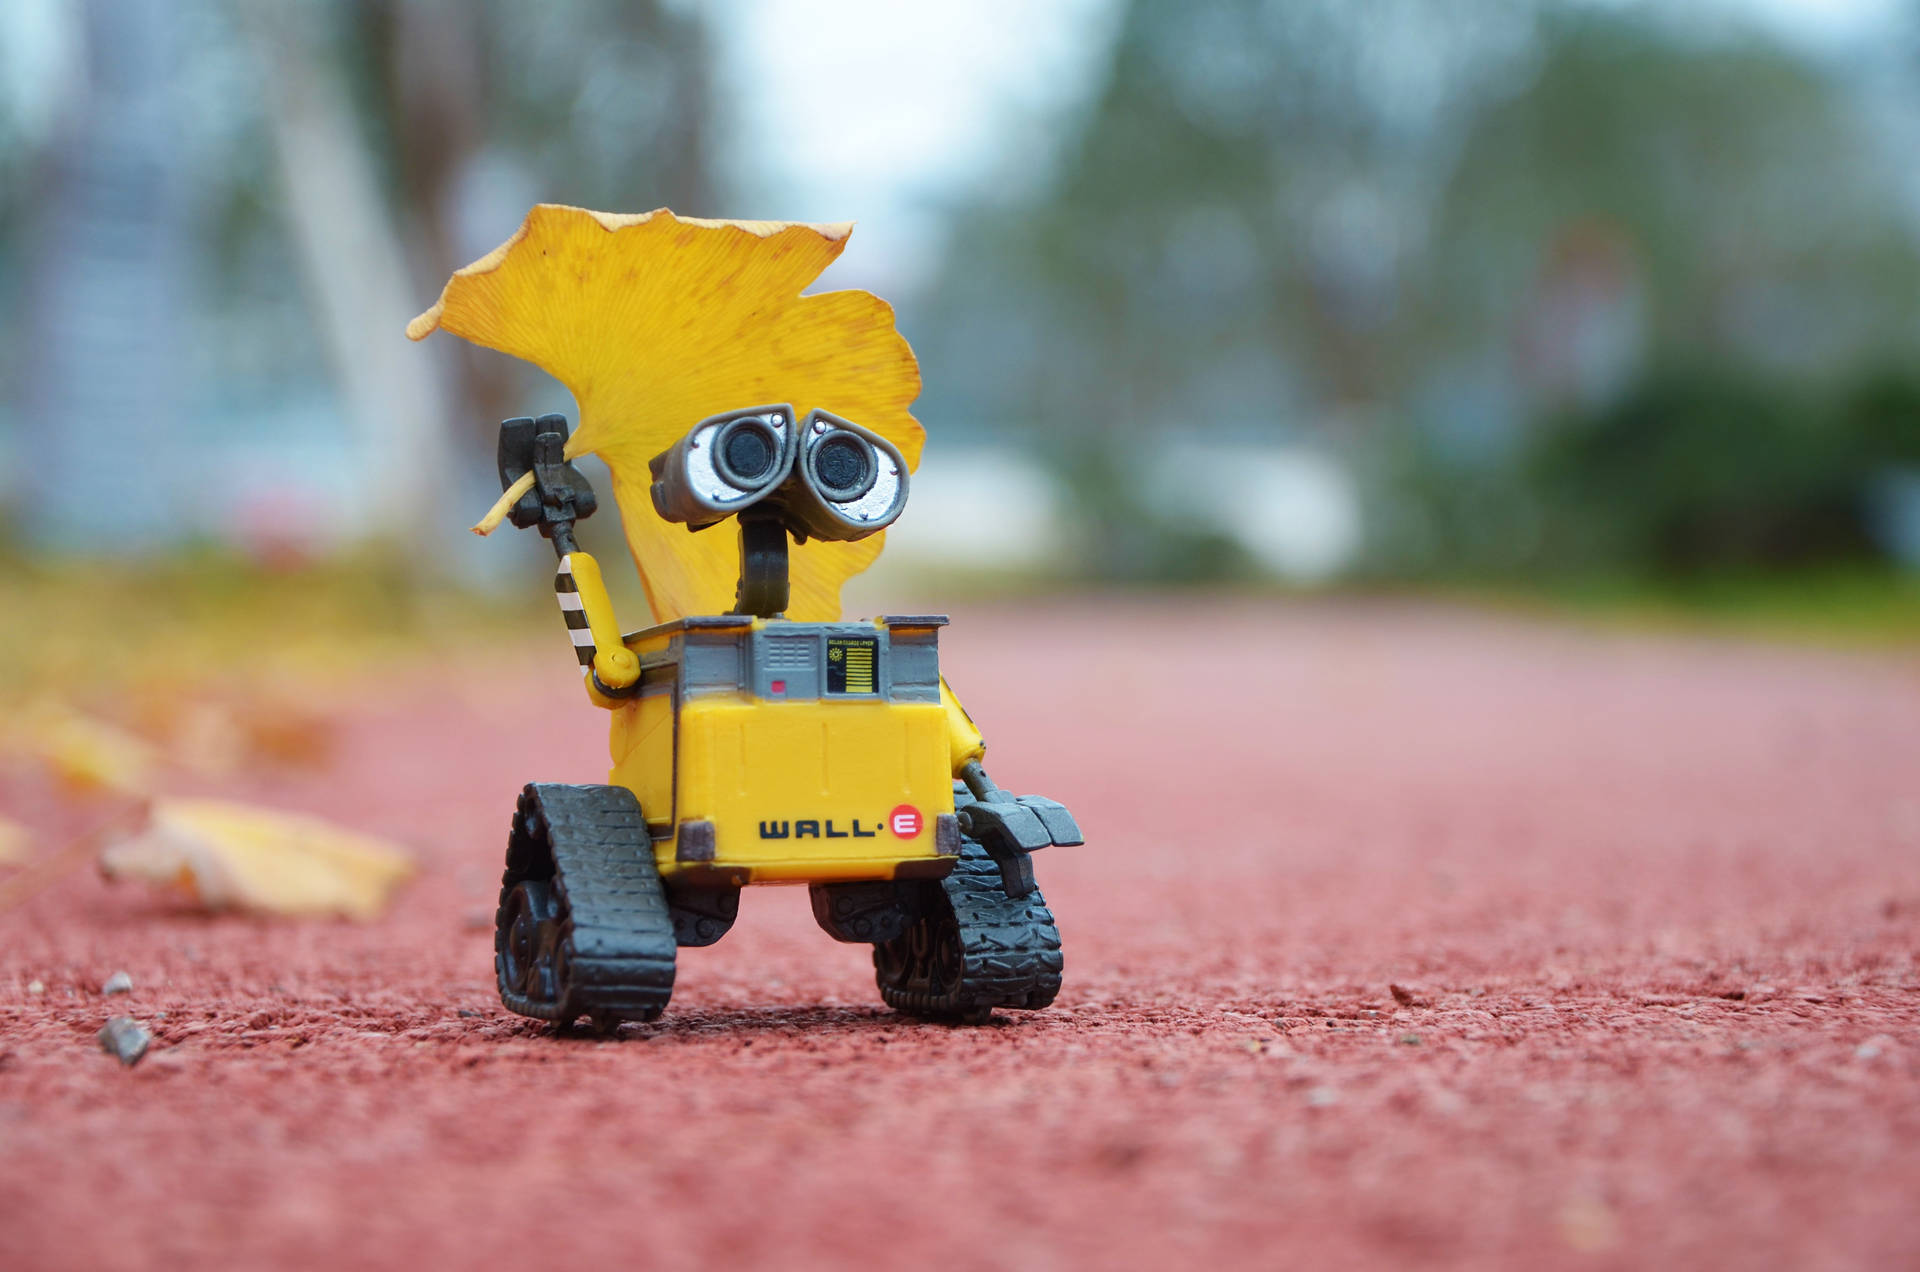 Wall E With Yellow Leaf